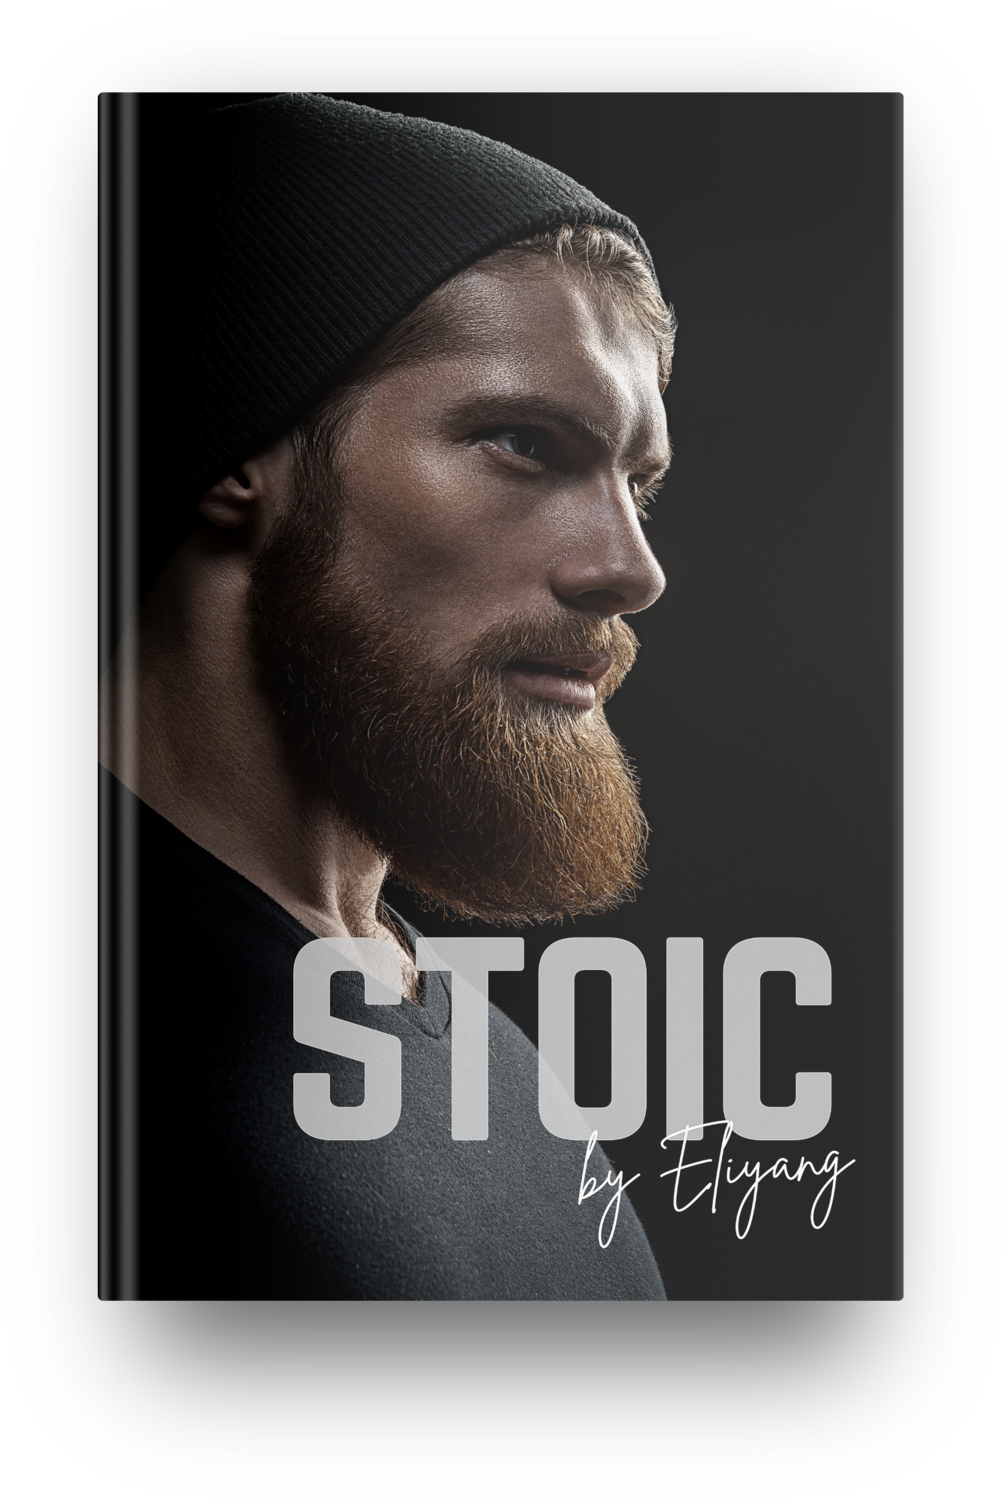 STOIC Signed Hardcover